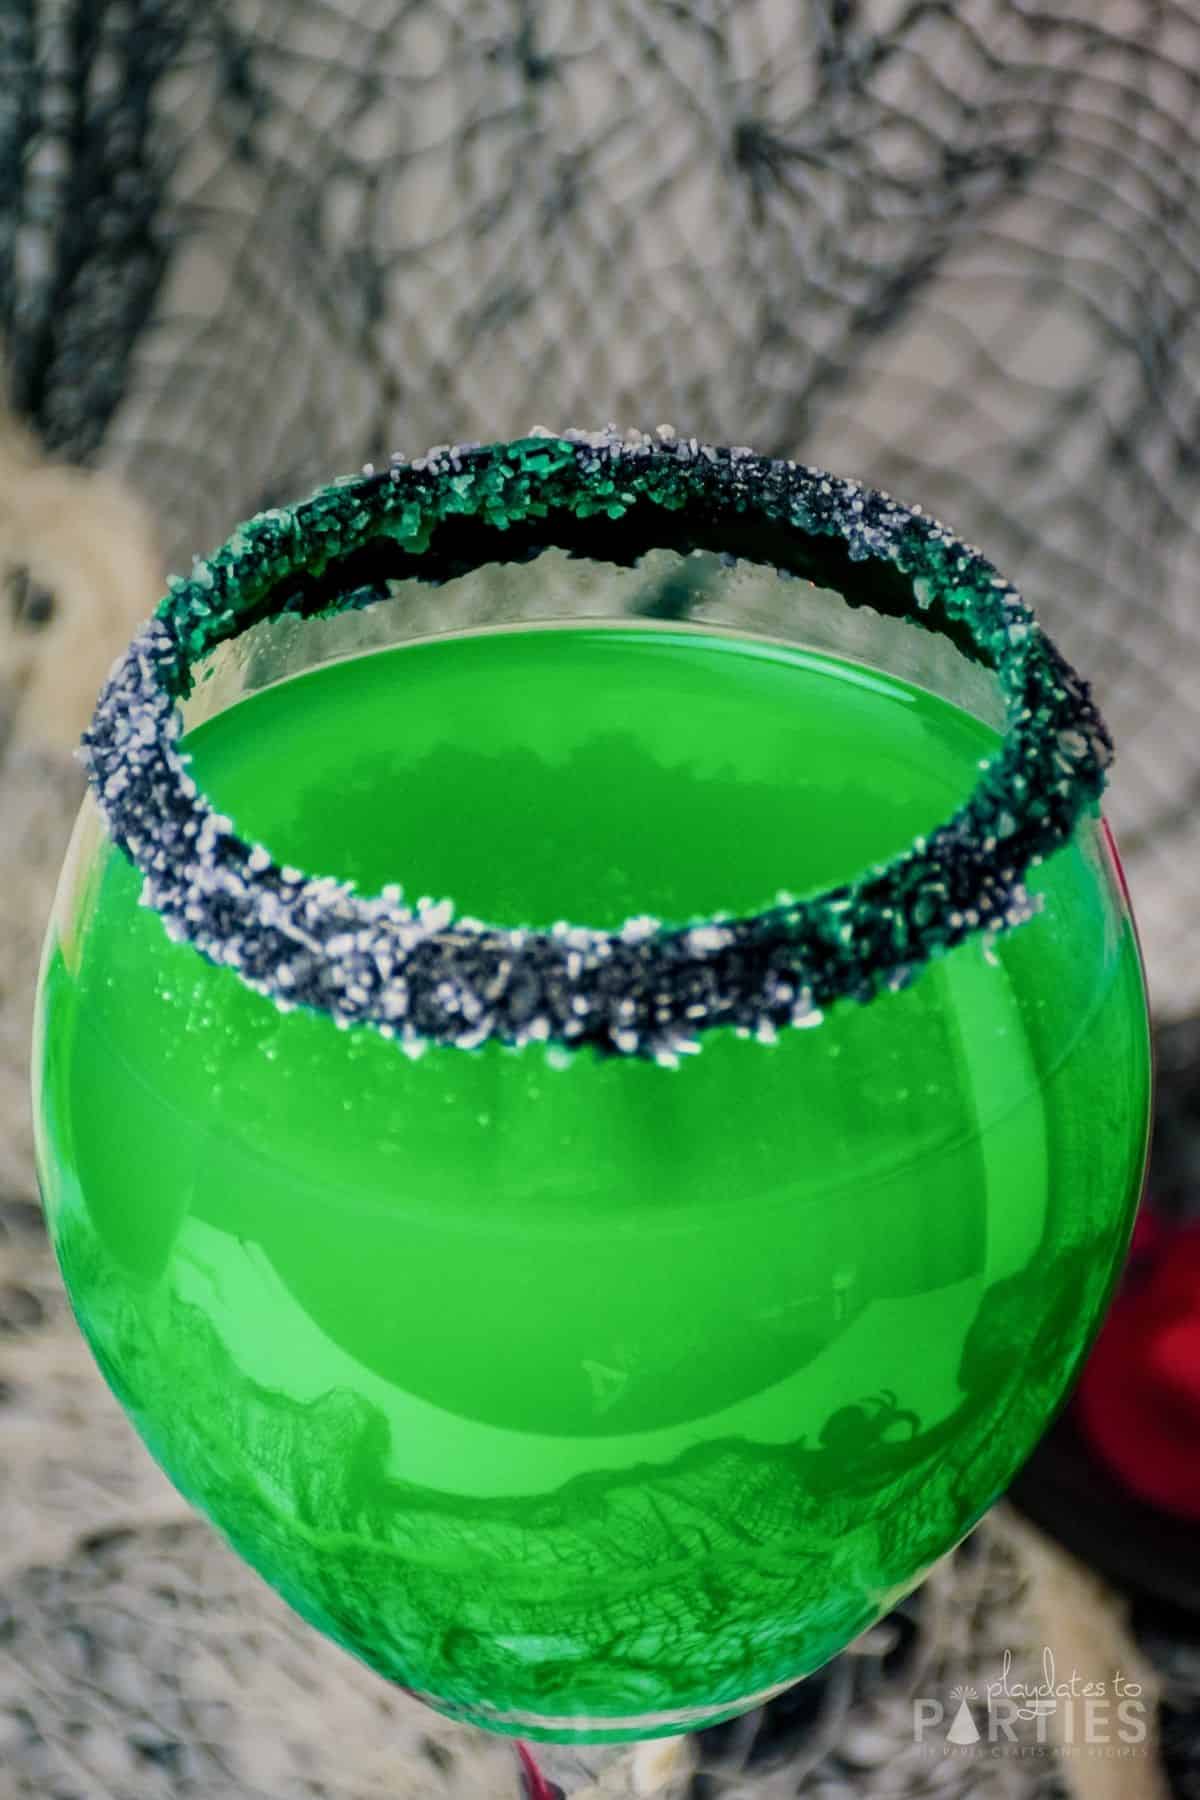 Green Halloween cocktail rimmed with black and white salt.